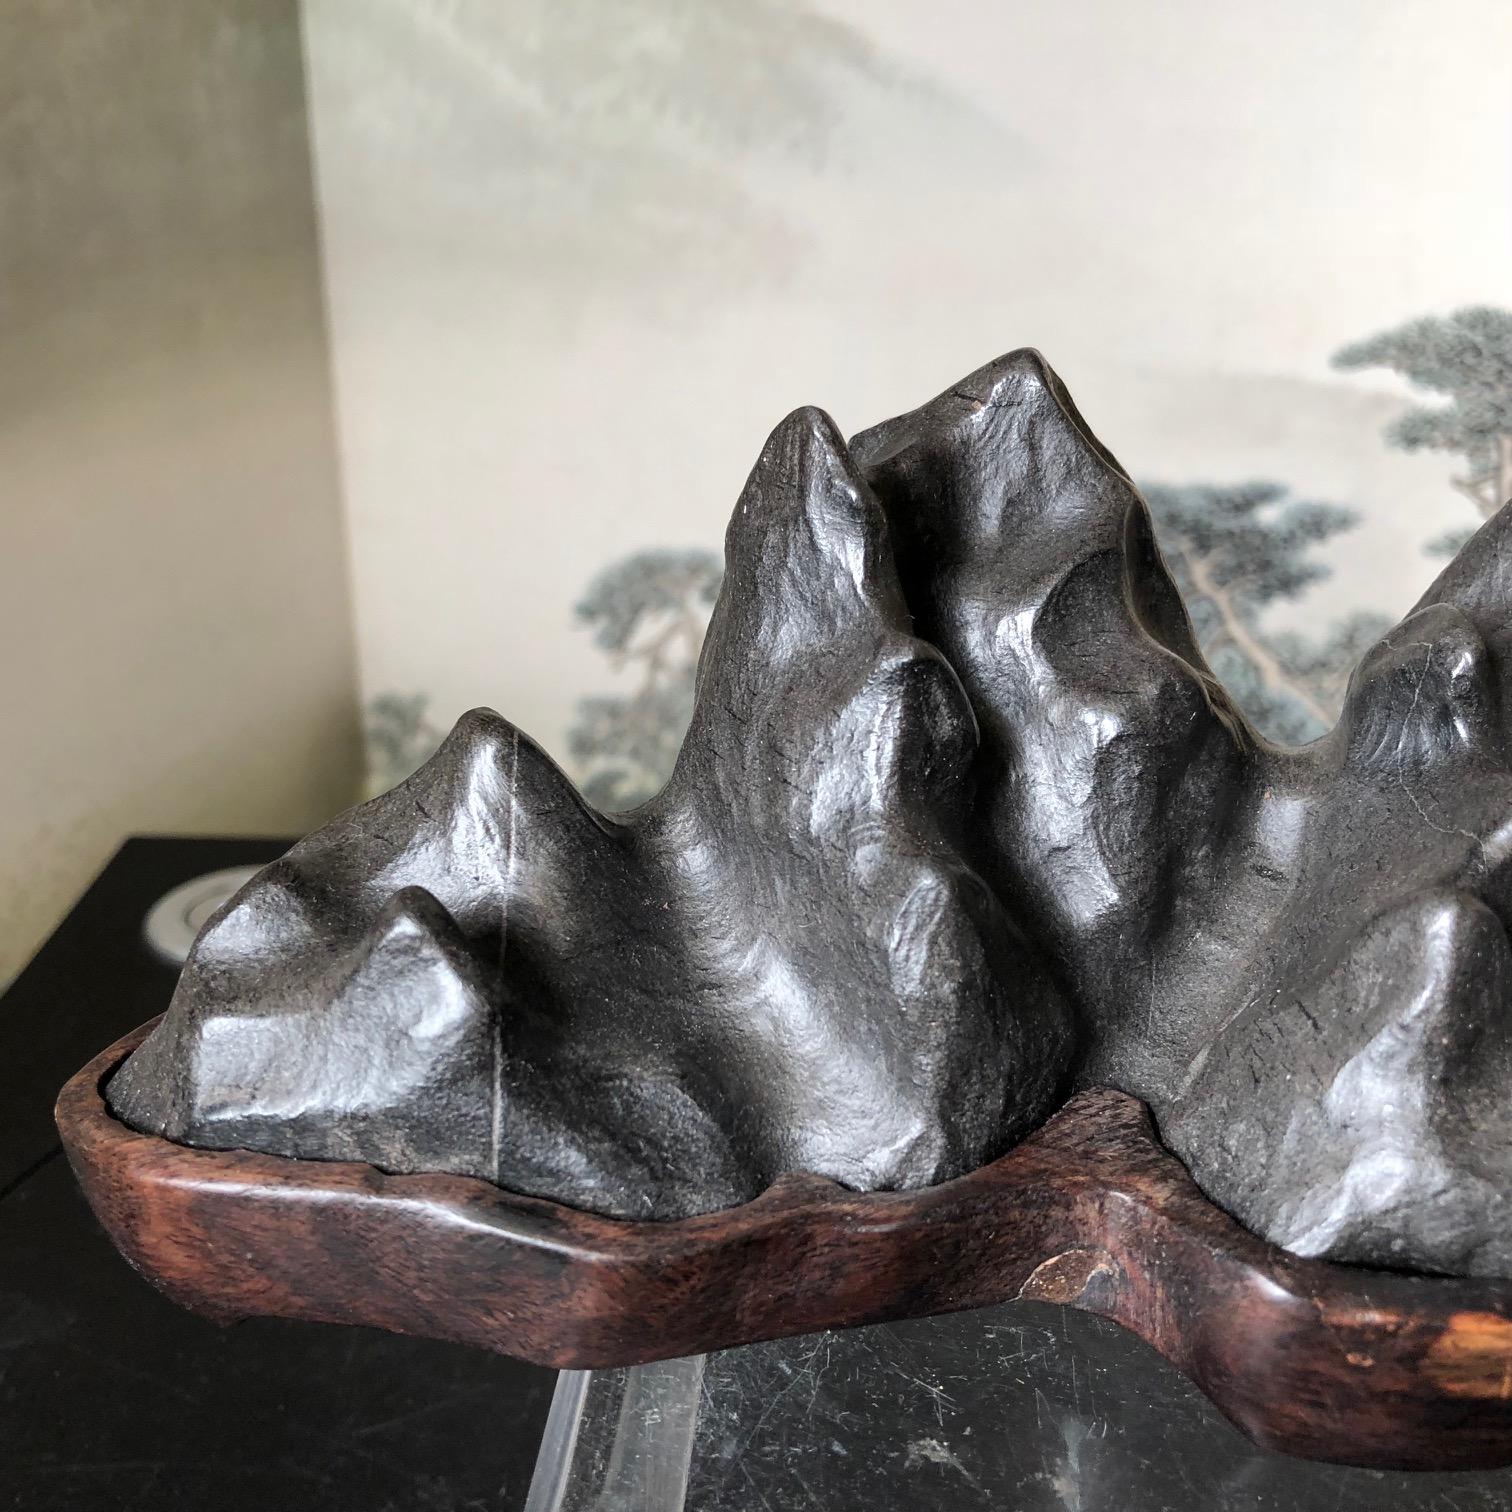 A very nice tall mountain scholar rock, natural bonsai Suiseki with nine high peaks and 10.5 inches long.

What do you see: mountains, trails in the Rockies or Himalayas?

Here's a great one-of-a-kind sculptural candidate for your special Asian